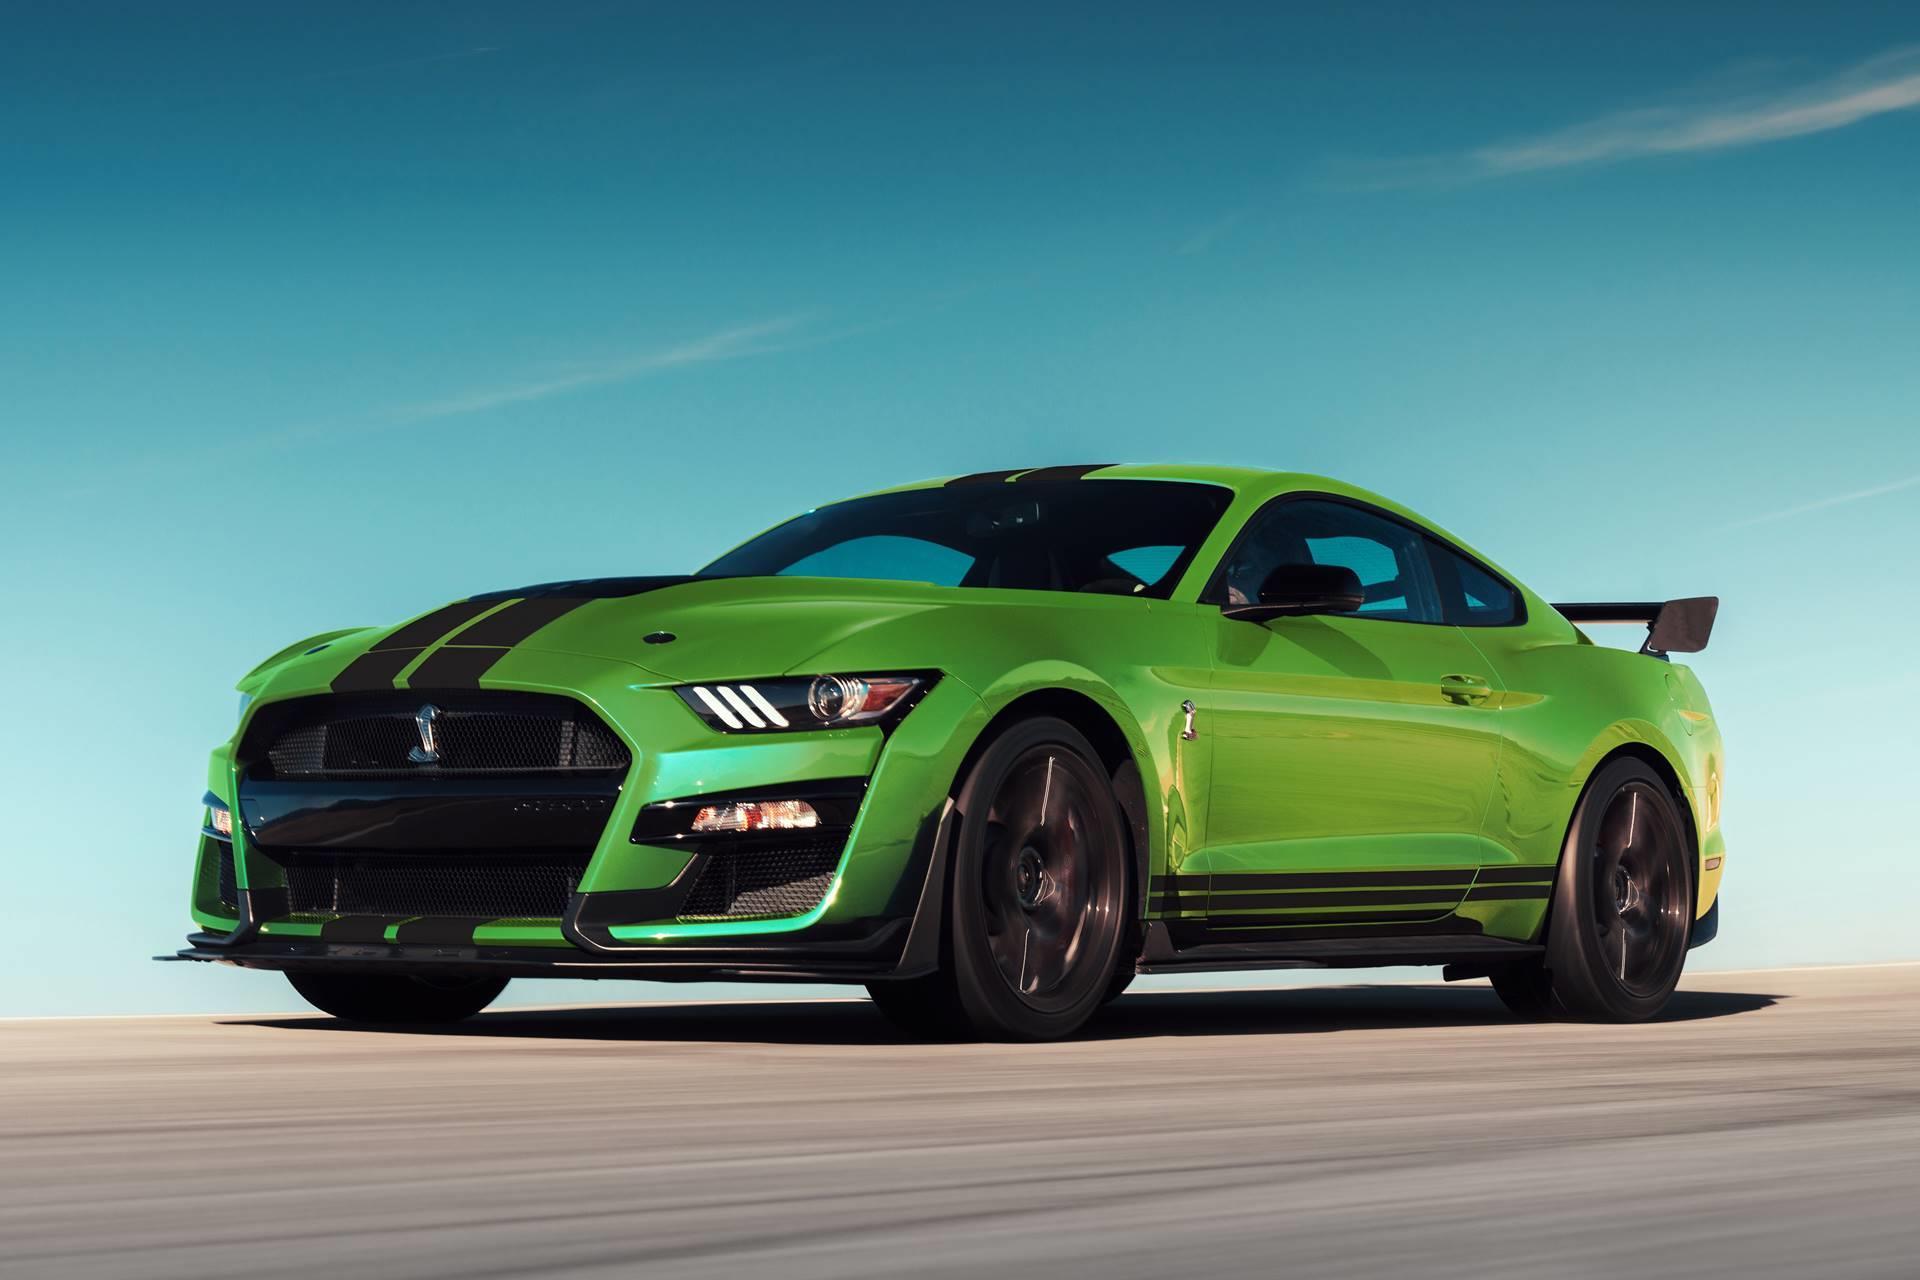 Ford Mustang Shelby GT500 Grabber Lime News and Information